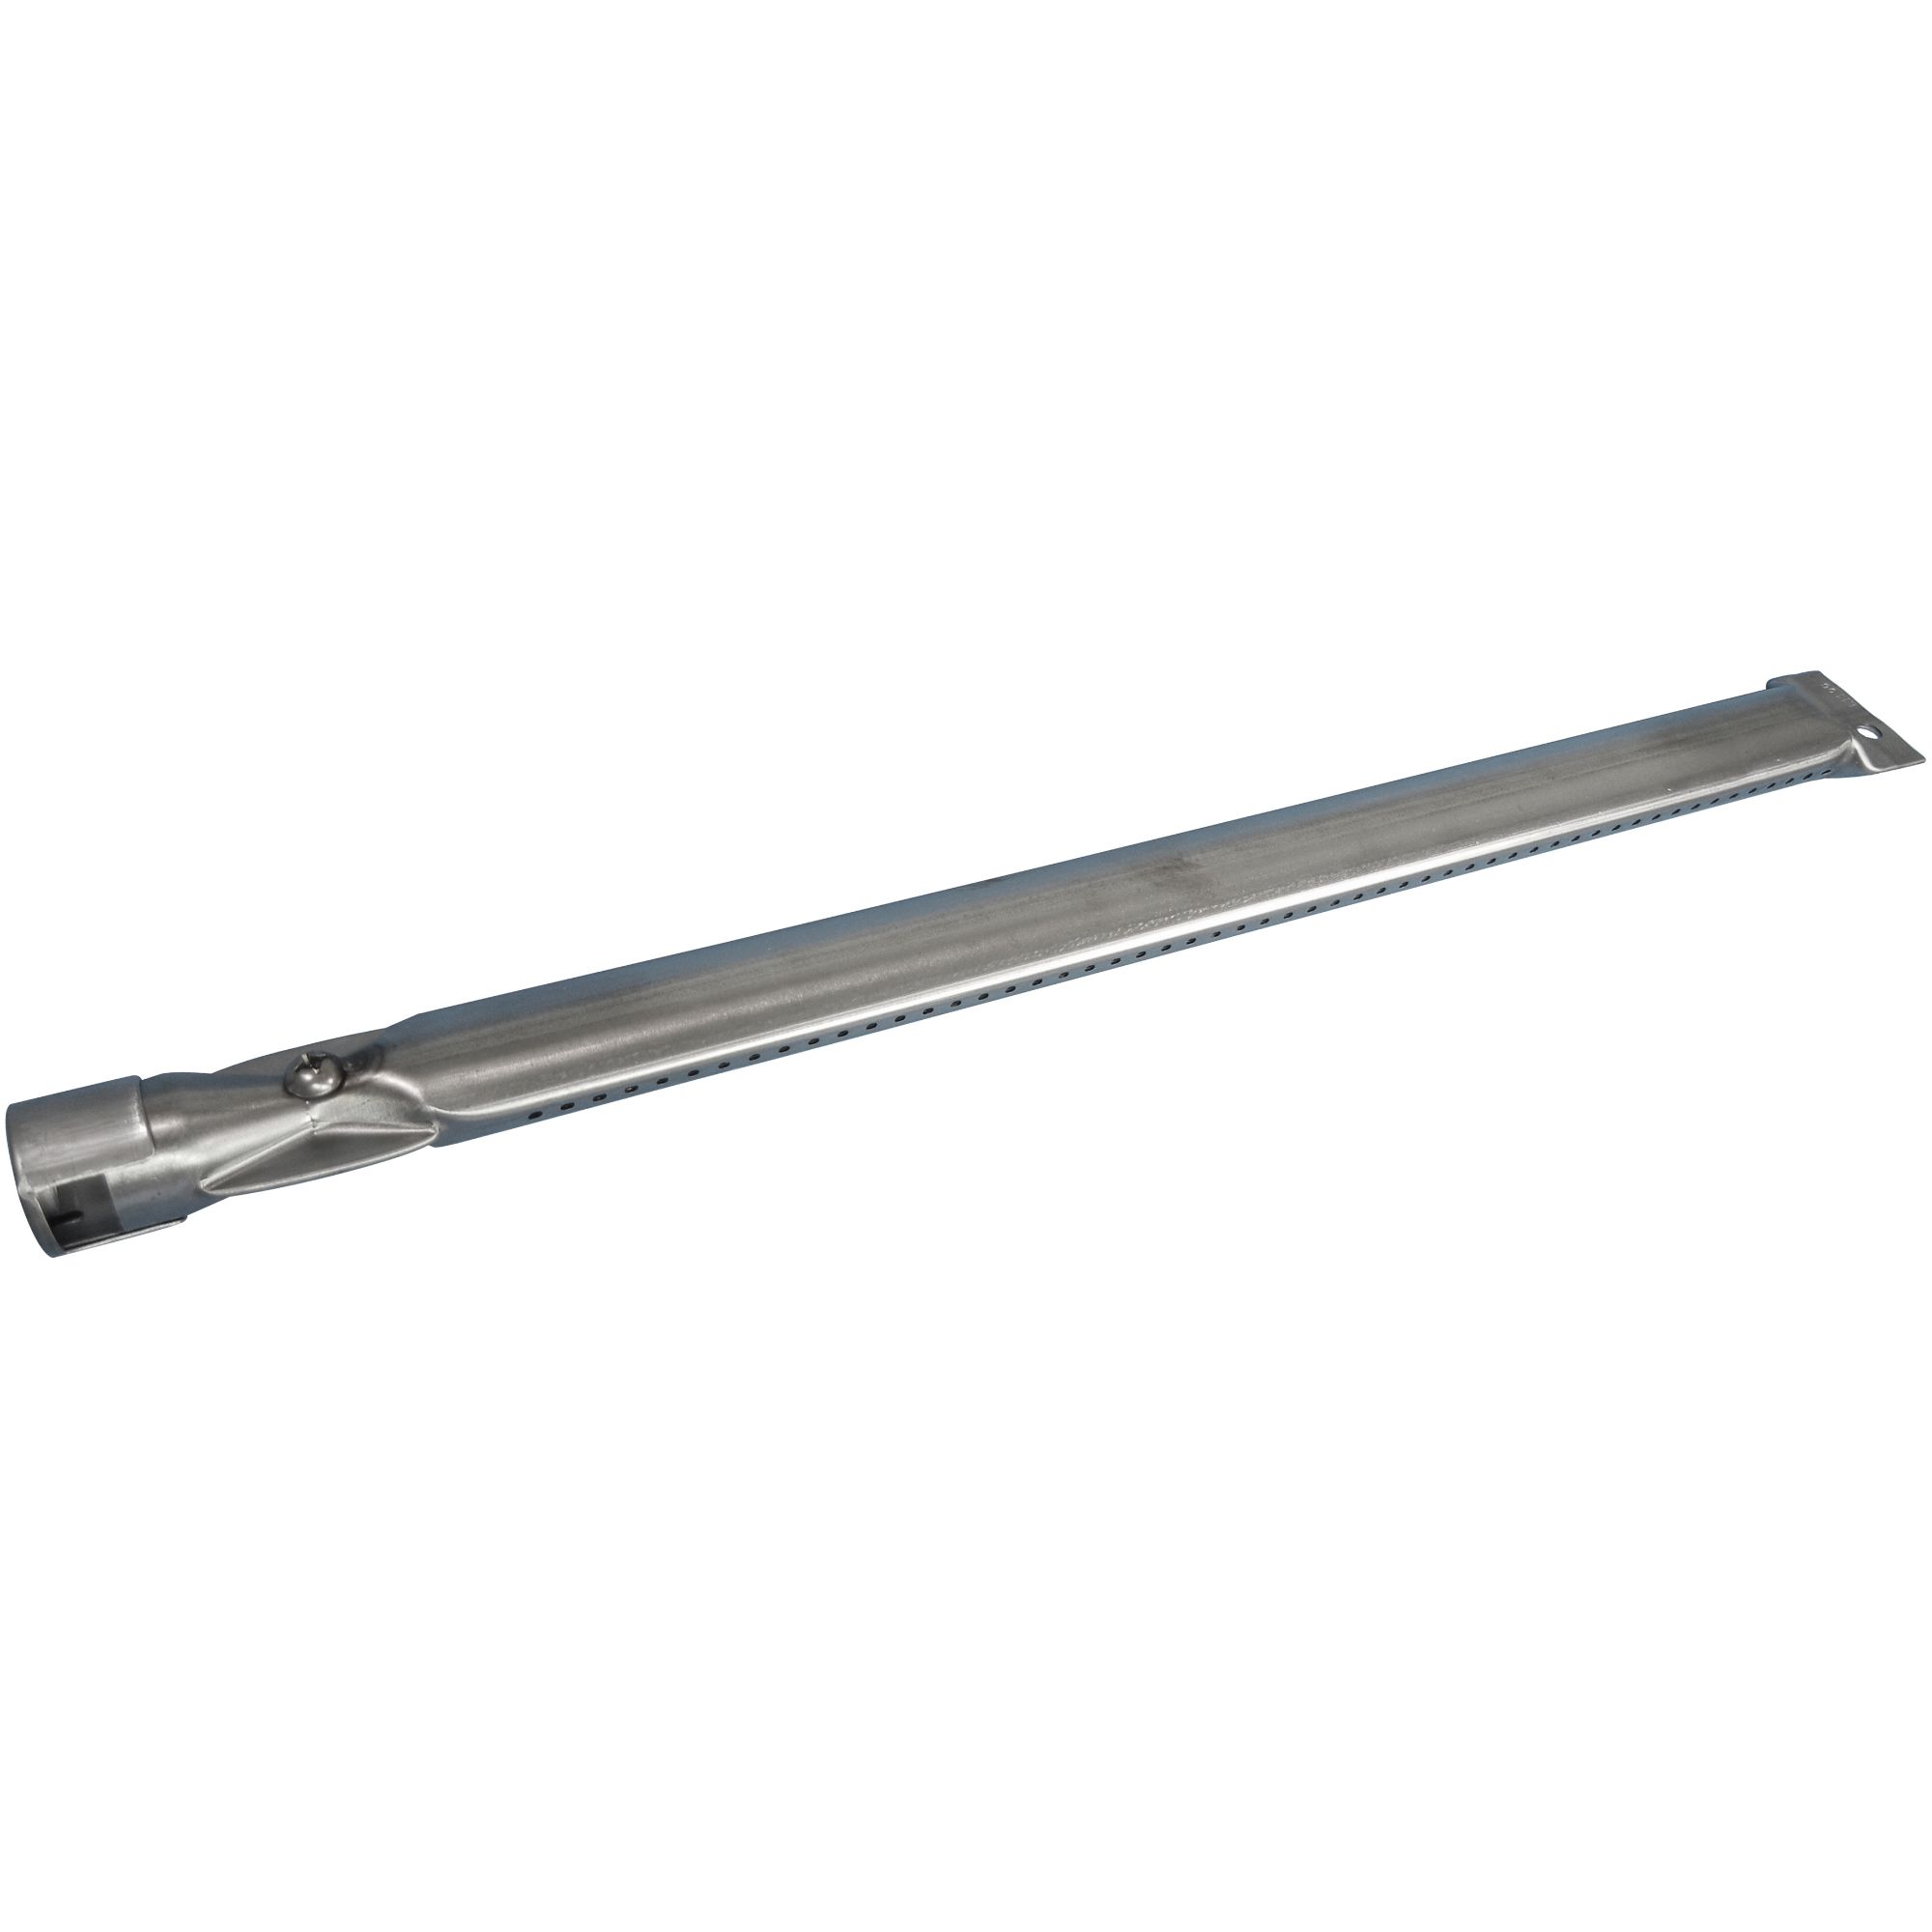 Stainless steel burner for Bakers & Chefs, Grill Chef, Uniflame brand gas grills